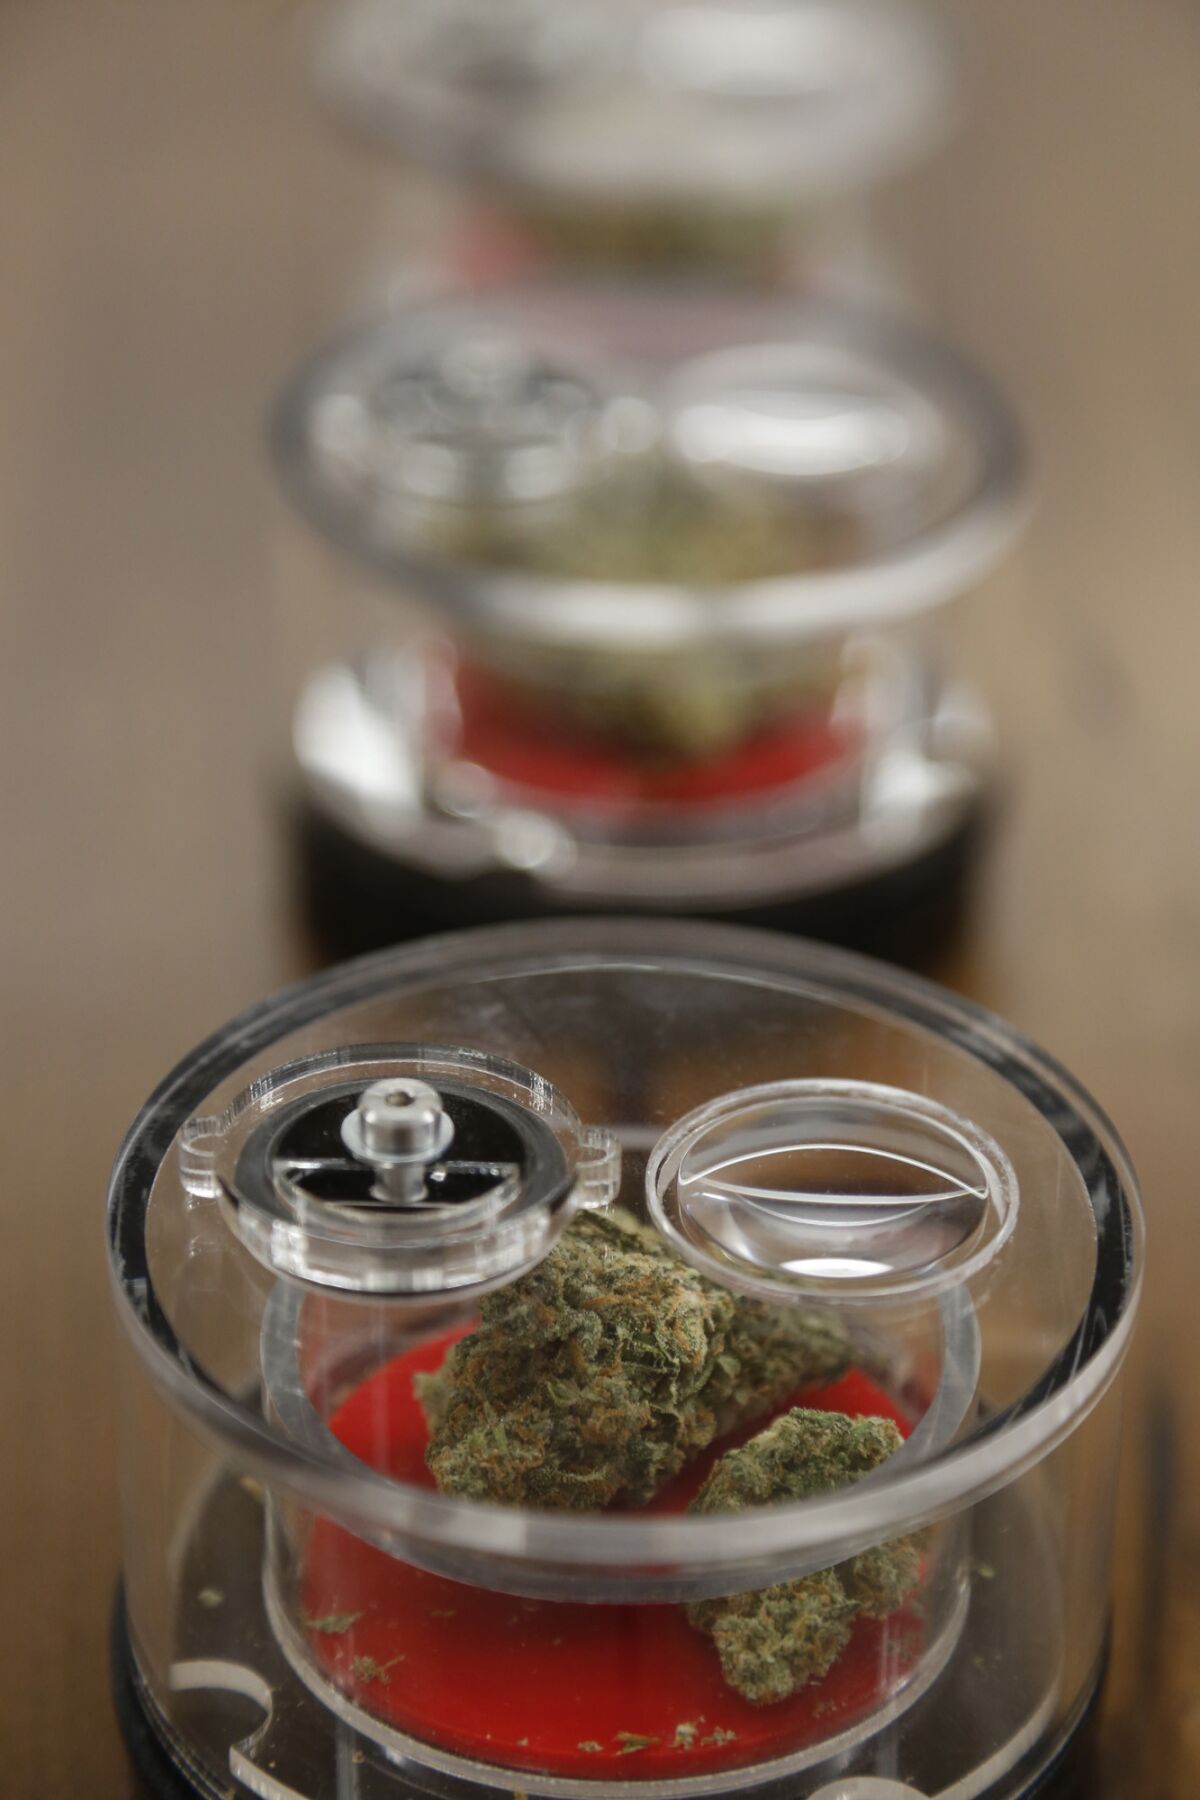 So-called bud pods enable customers to smell marijuana strains and look at them under a magnifying glass at the MedMen shop in West Hollywood.